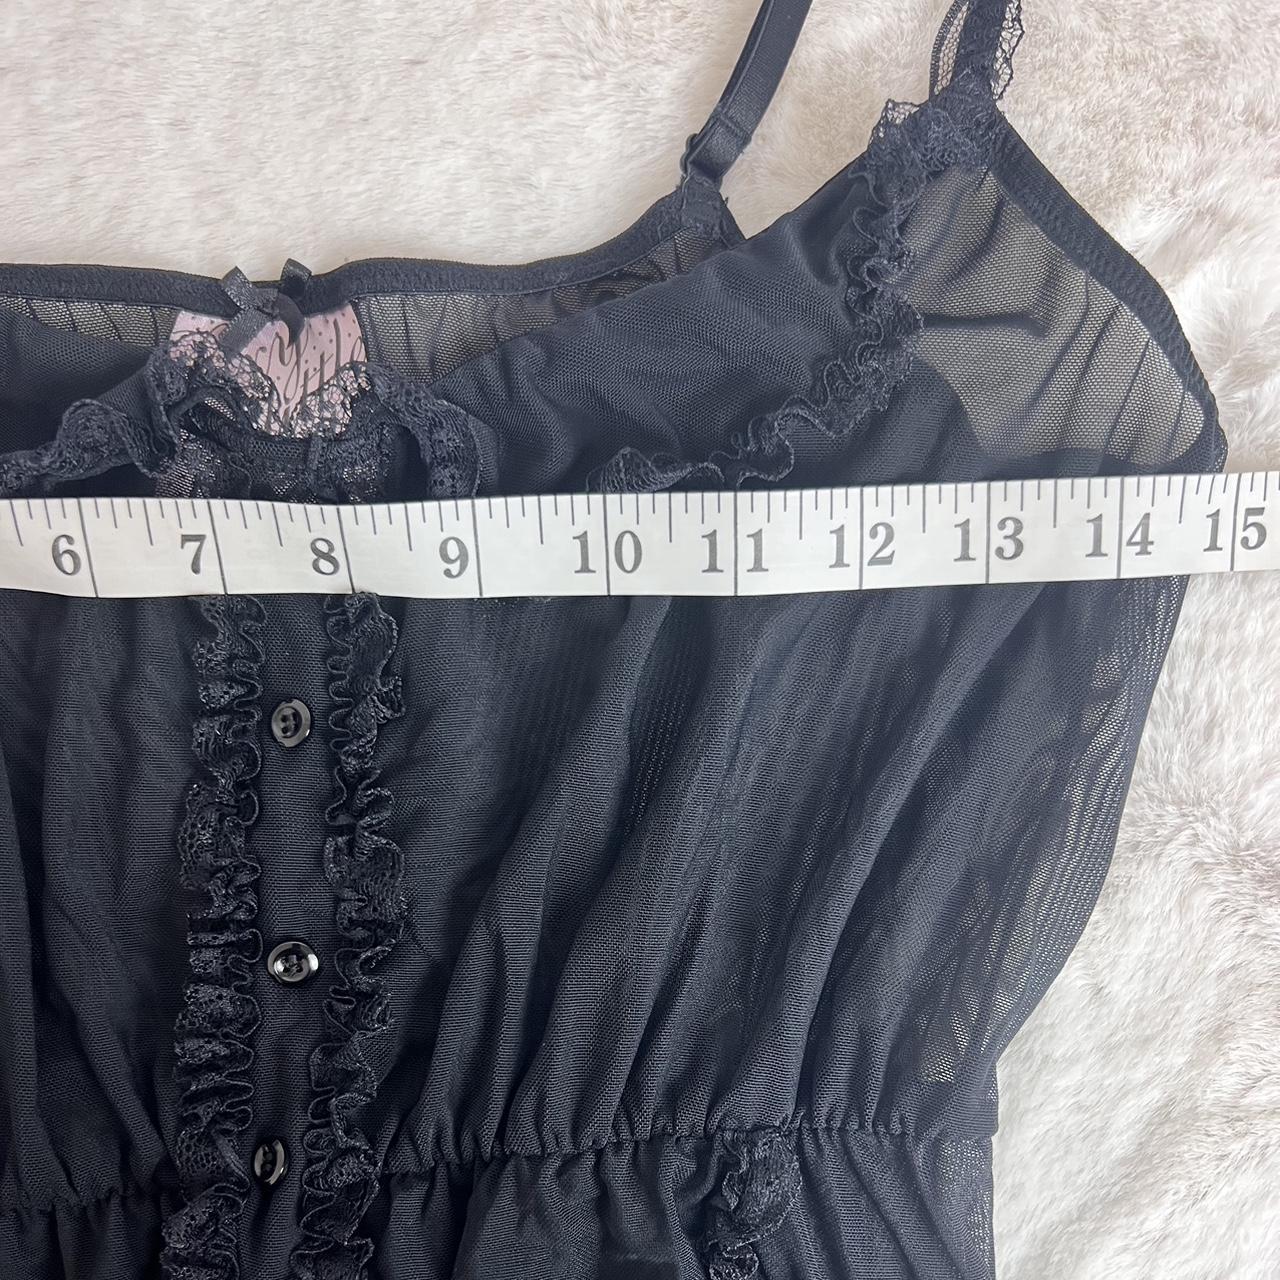 Victoria's Secret Sexy Little Things Maid - Depop